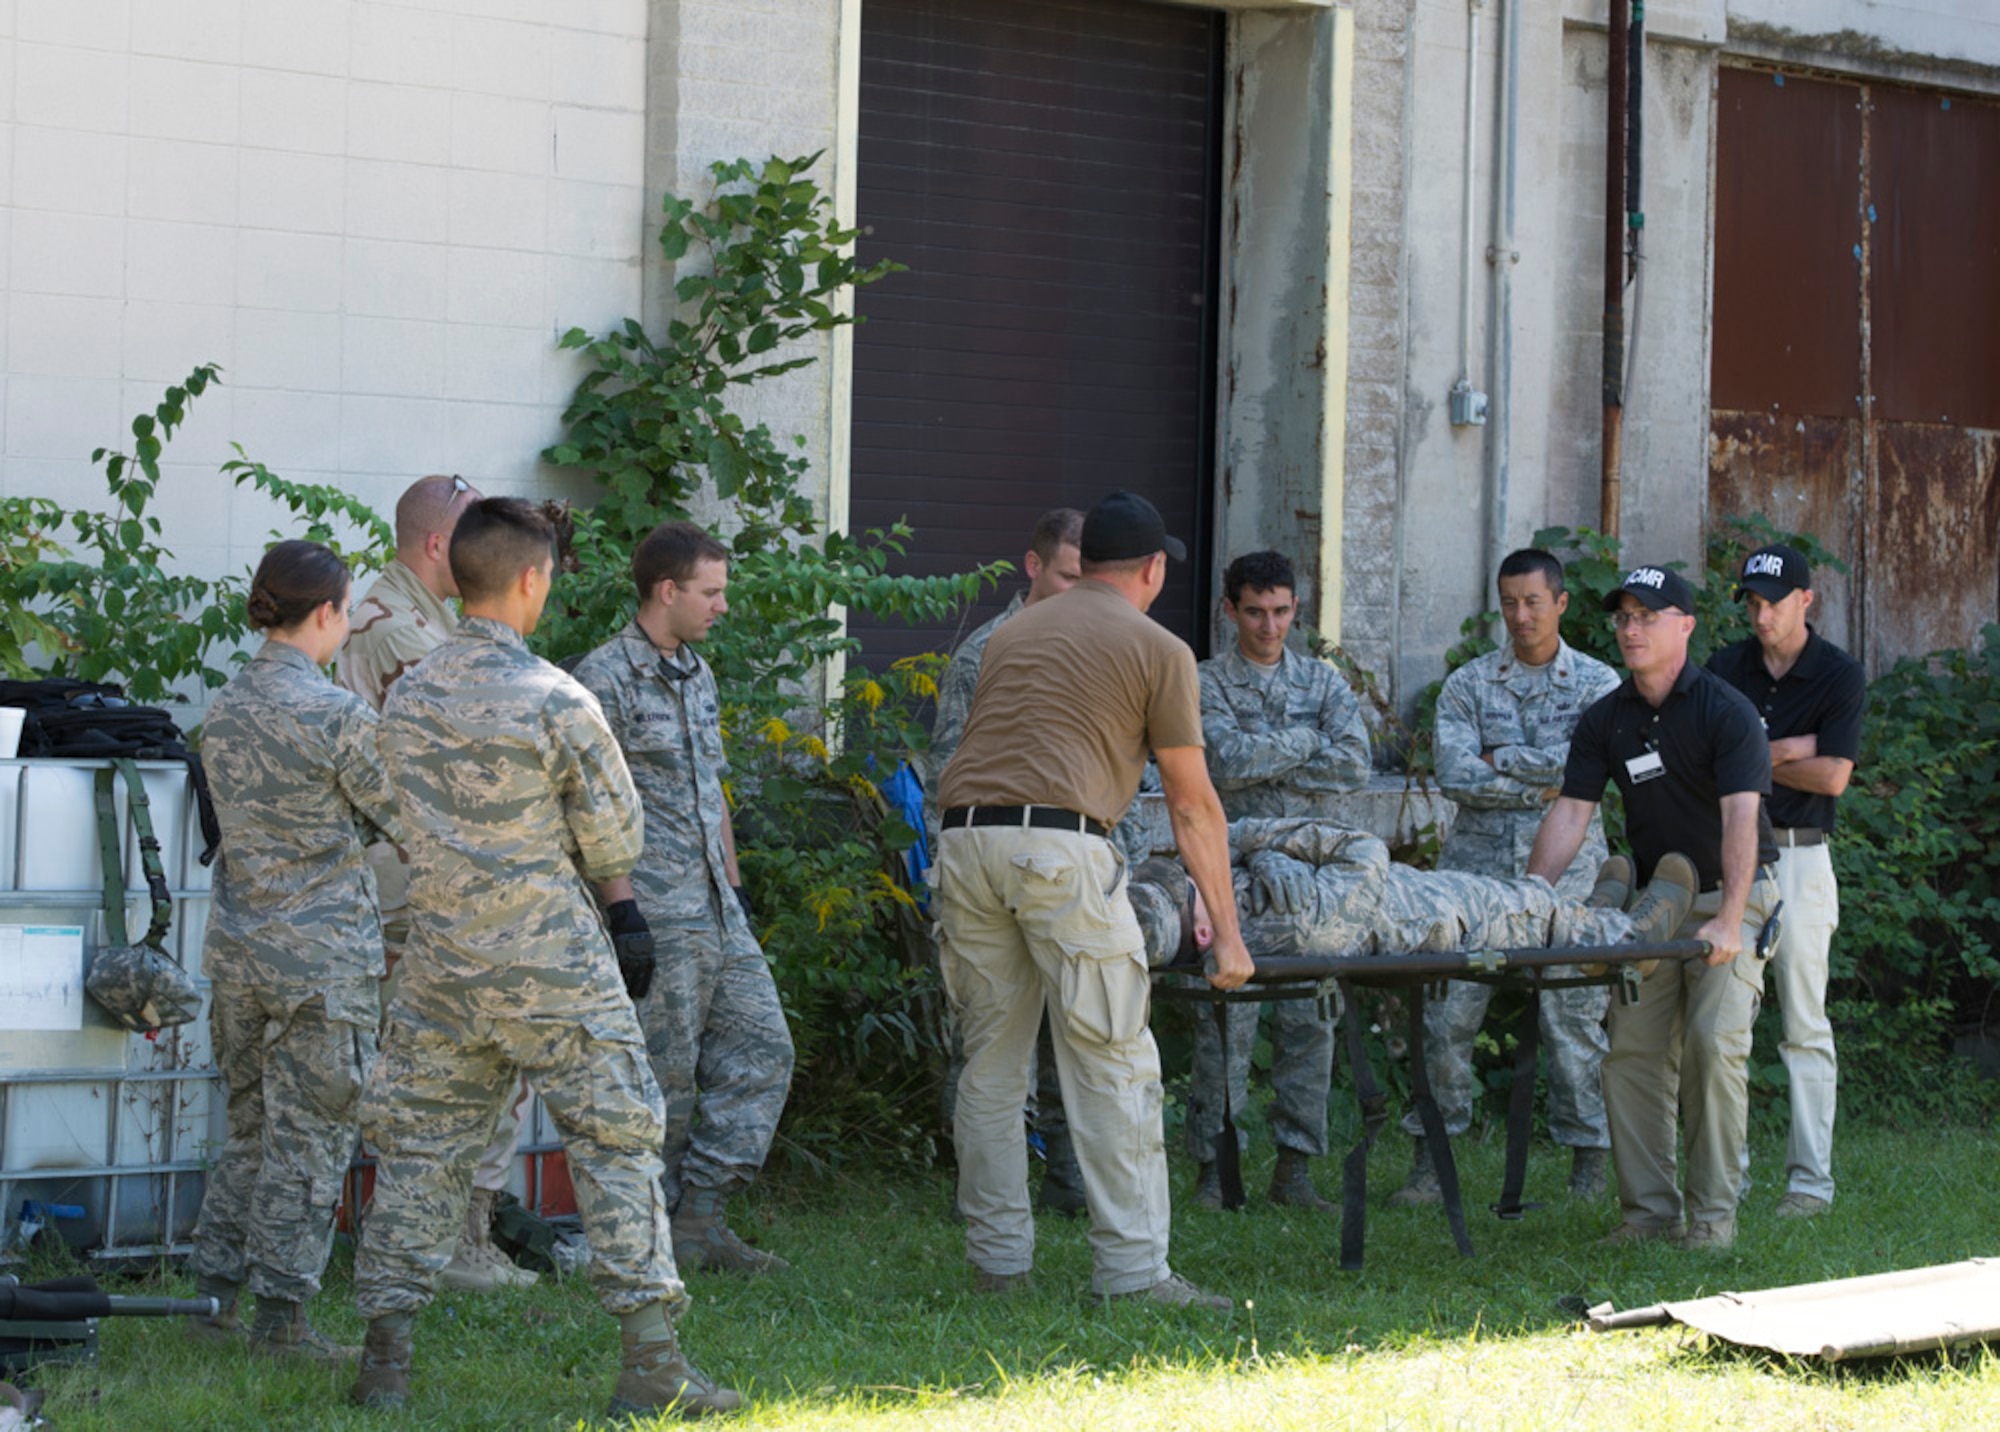 Participants in the Air Force Research Laboratory 2015 Tech Warrior exercise learn some of the basics of safely transporting a wounded service member on a stretcher, Sept. 10, 2015, at the National Center for Medical Readiness, Fairborn, Ohio. During the exercise participants are learning a variety of skills such as base defense, self-aide buddy care, tactical vehicle driving and land navigation. (U.S. Air Force photo by Wesley Farnsworth / Released)